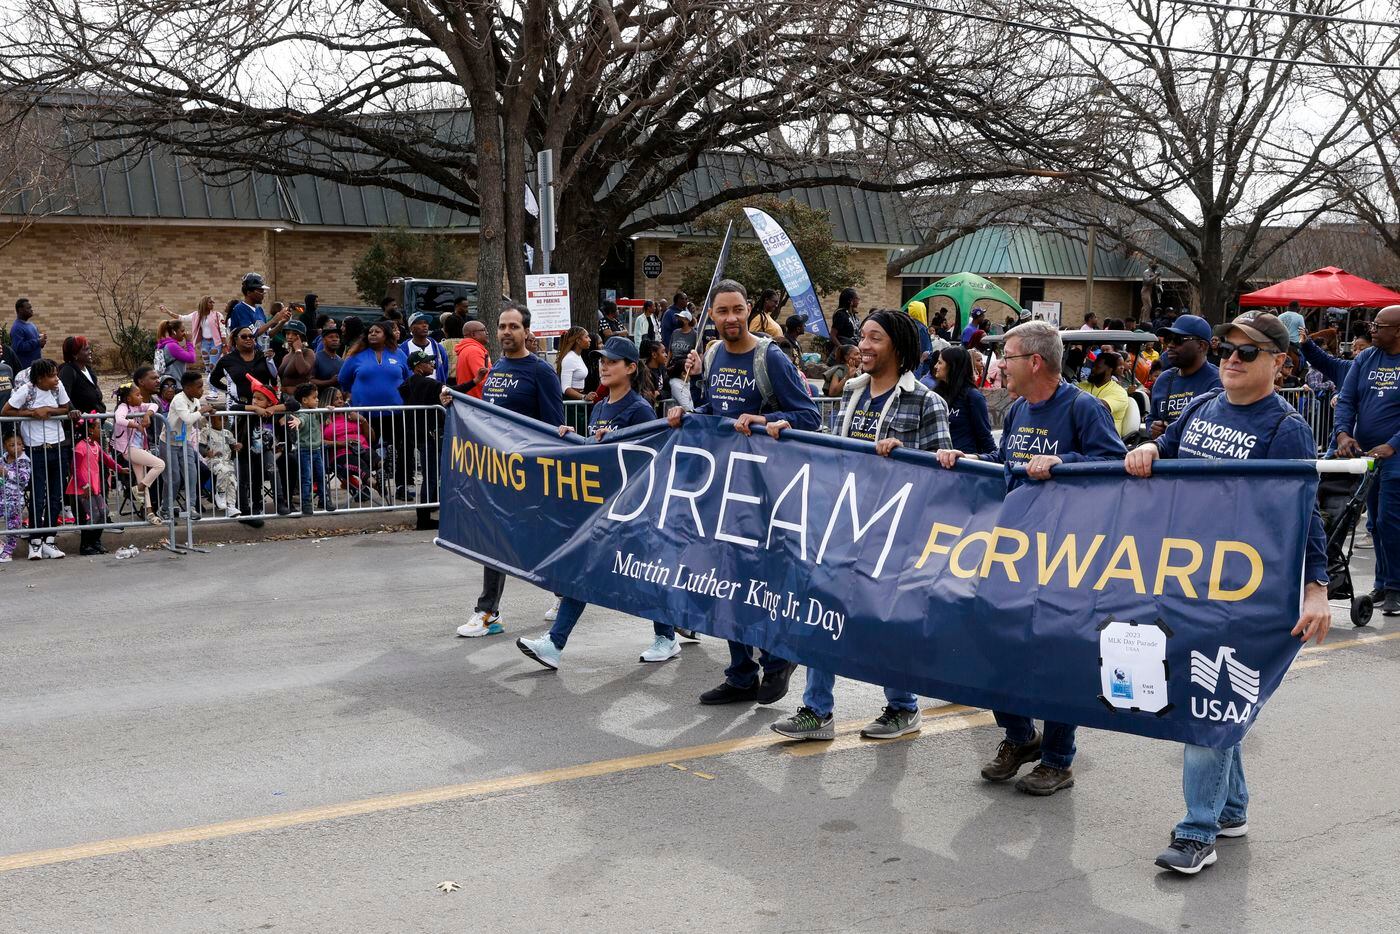 People with USAA walk with a banner during the Martin Luther King Jr. Day Parade in Dallas,...